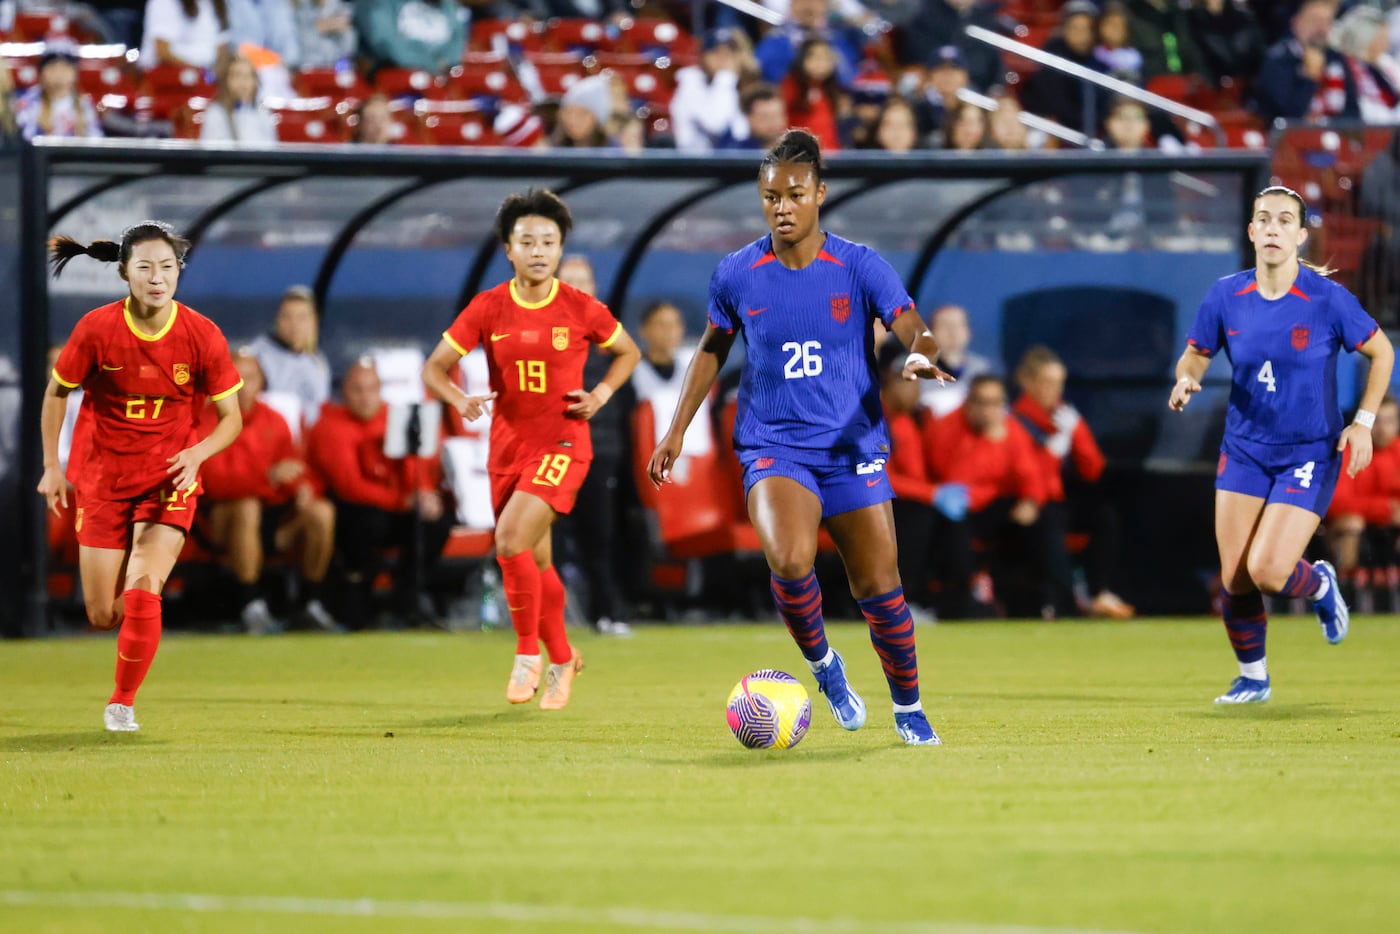 United States’ Jaedyn Shaw dribbles down the field against China PR during the first half of...